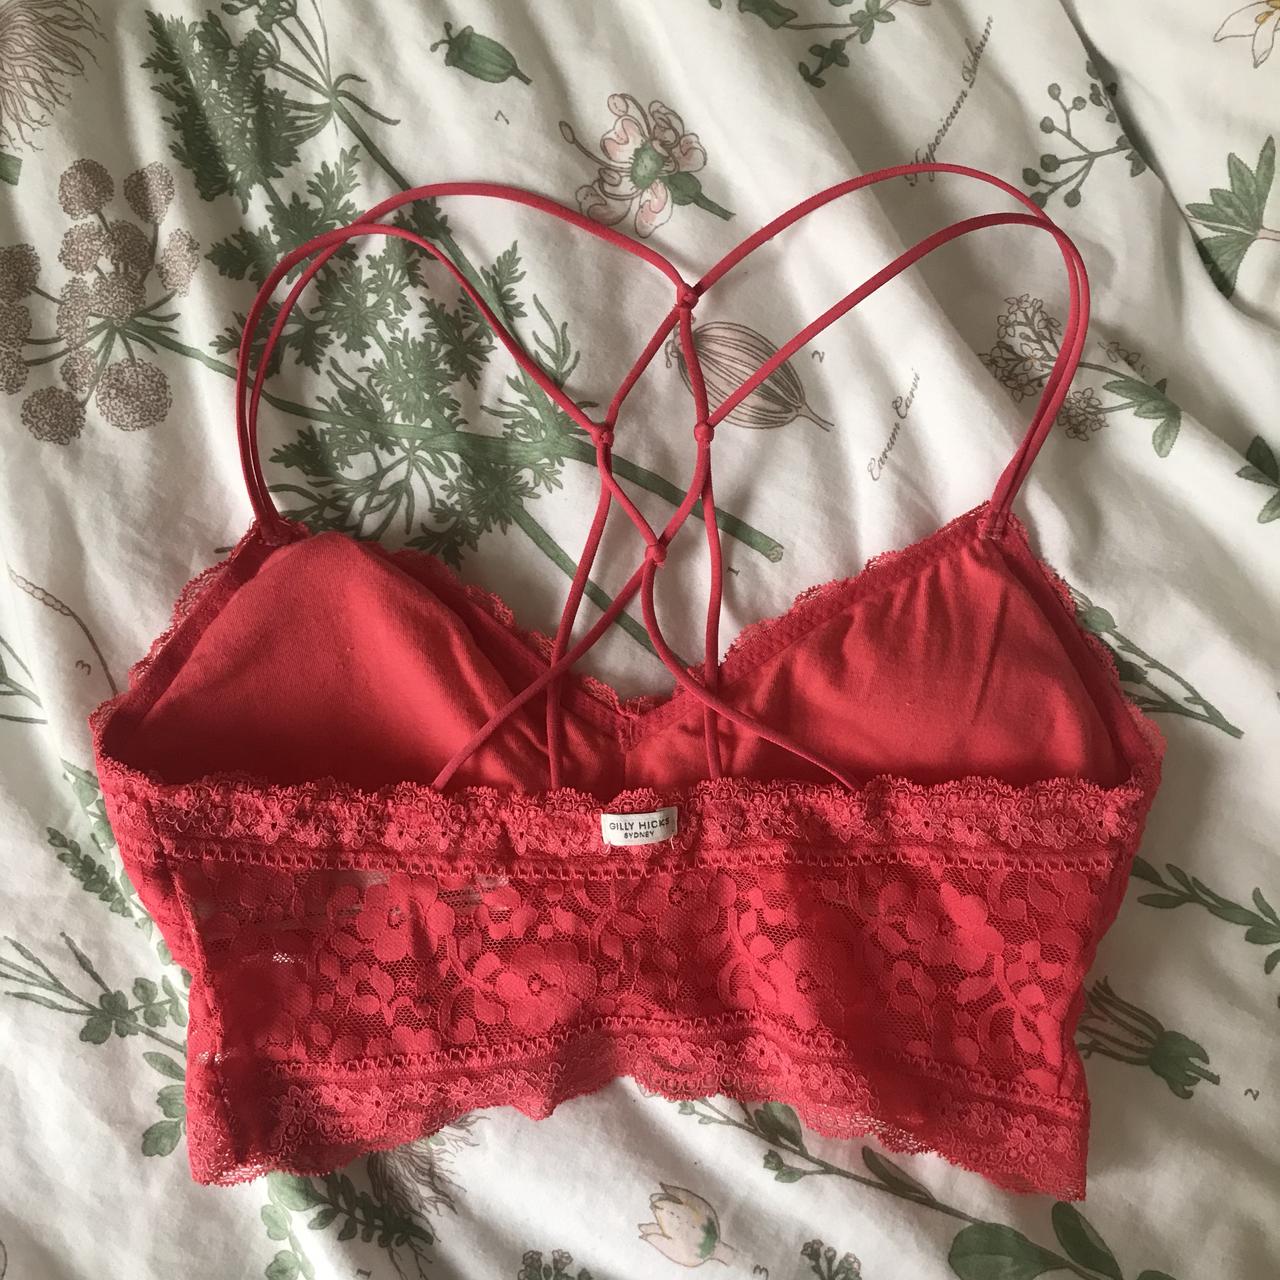 Gilly Hicks Burgundy Lace Bralette Red - $8 - From Michaella